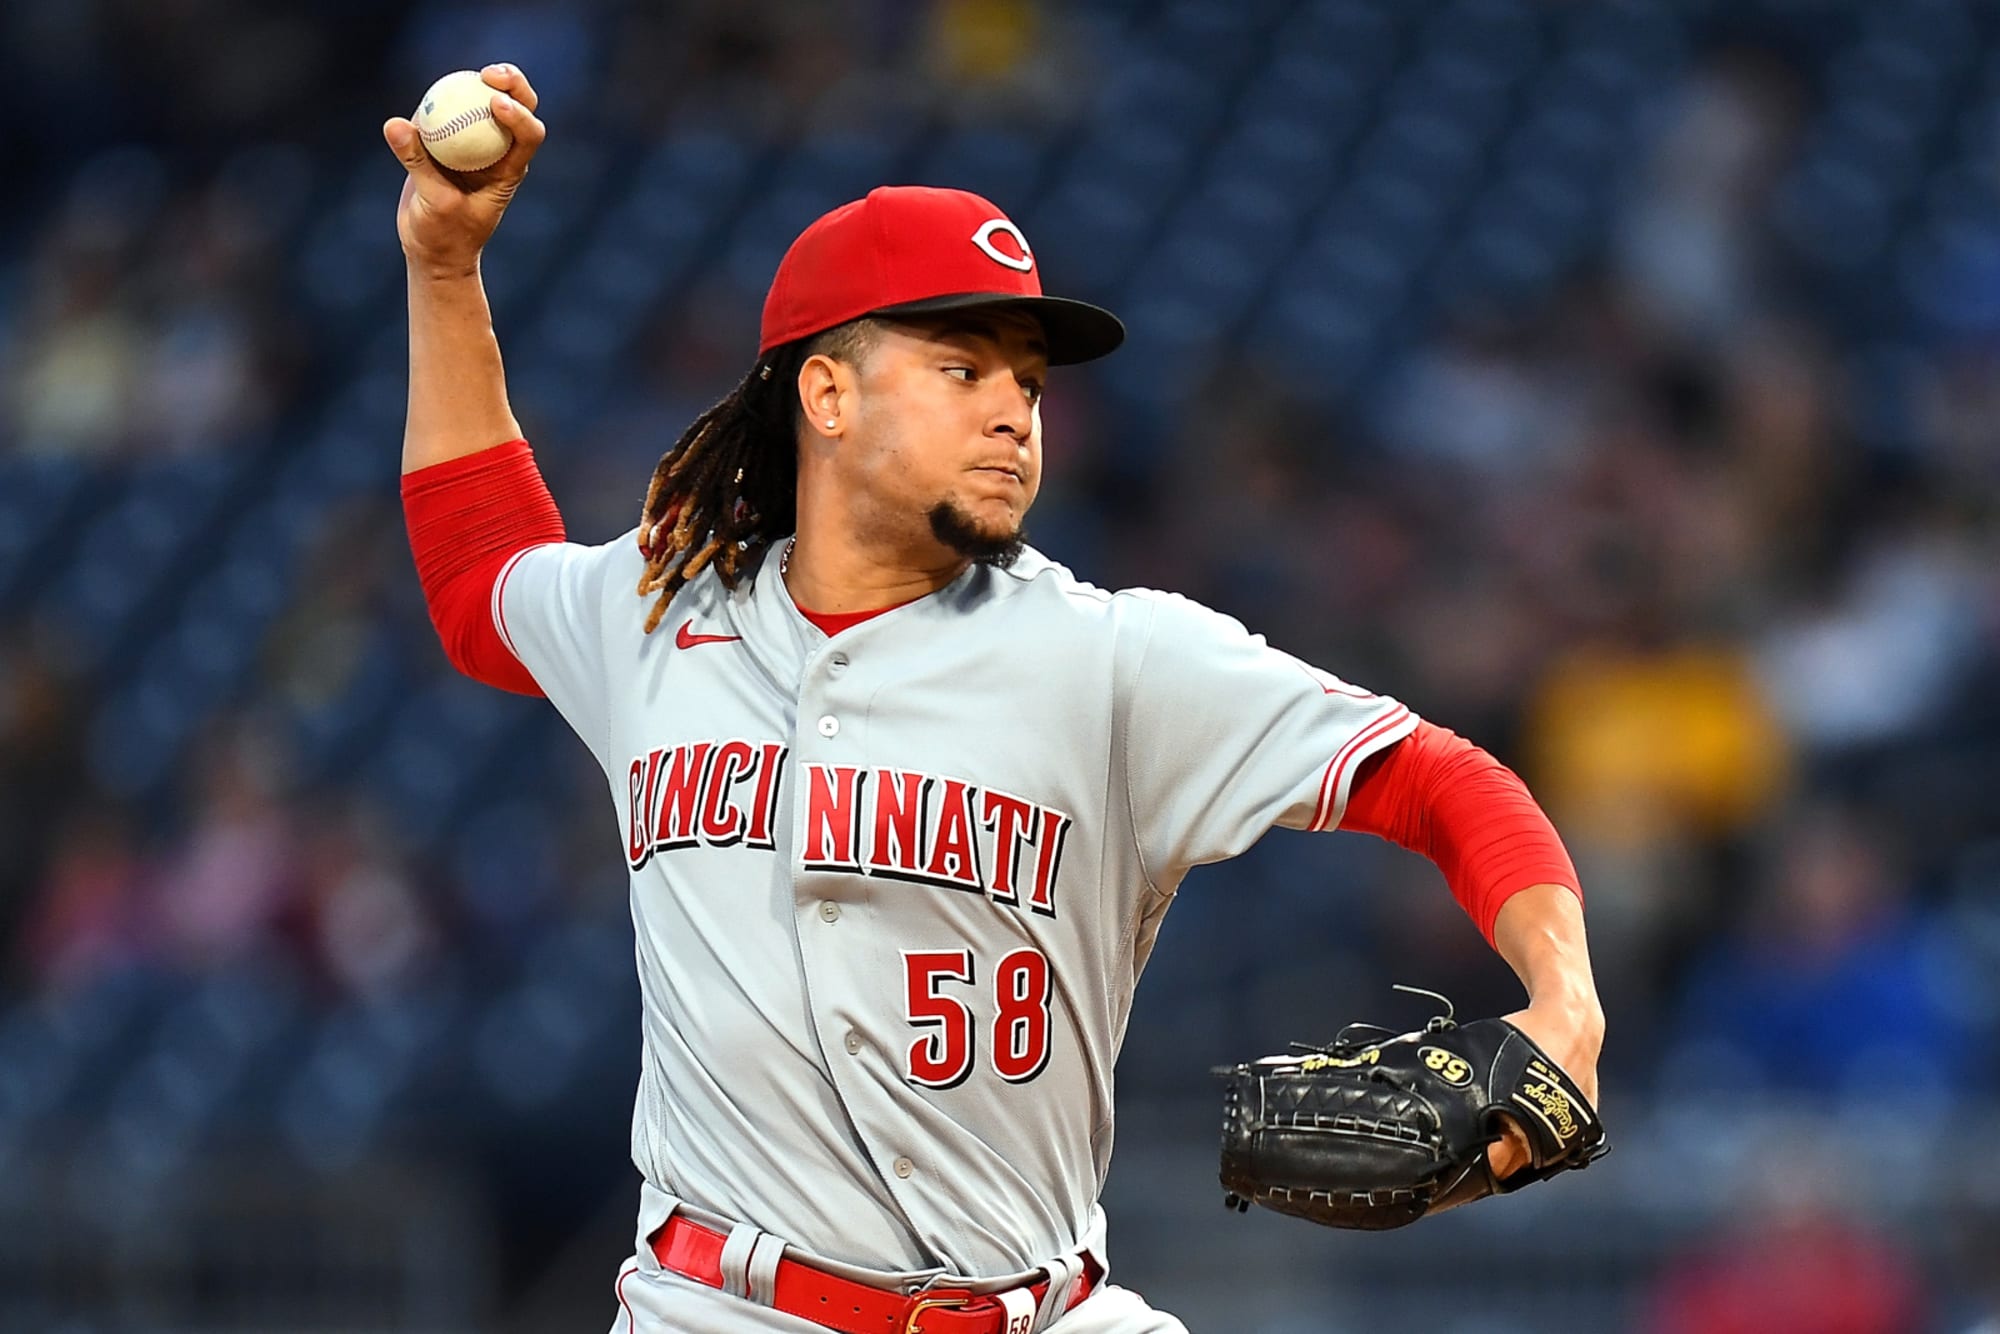 Cincinnati Reds - The #Reds today signed free agent OF